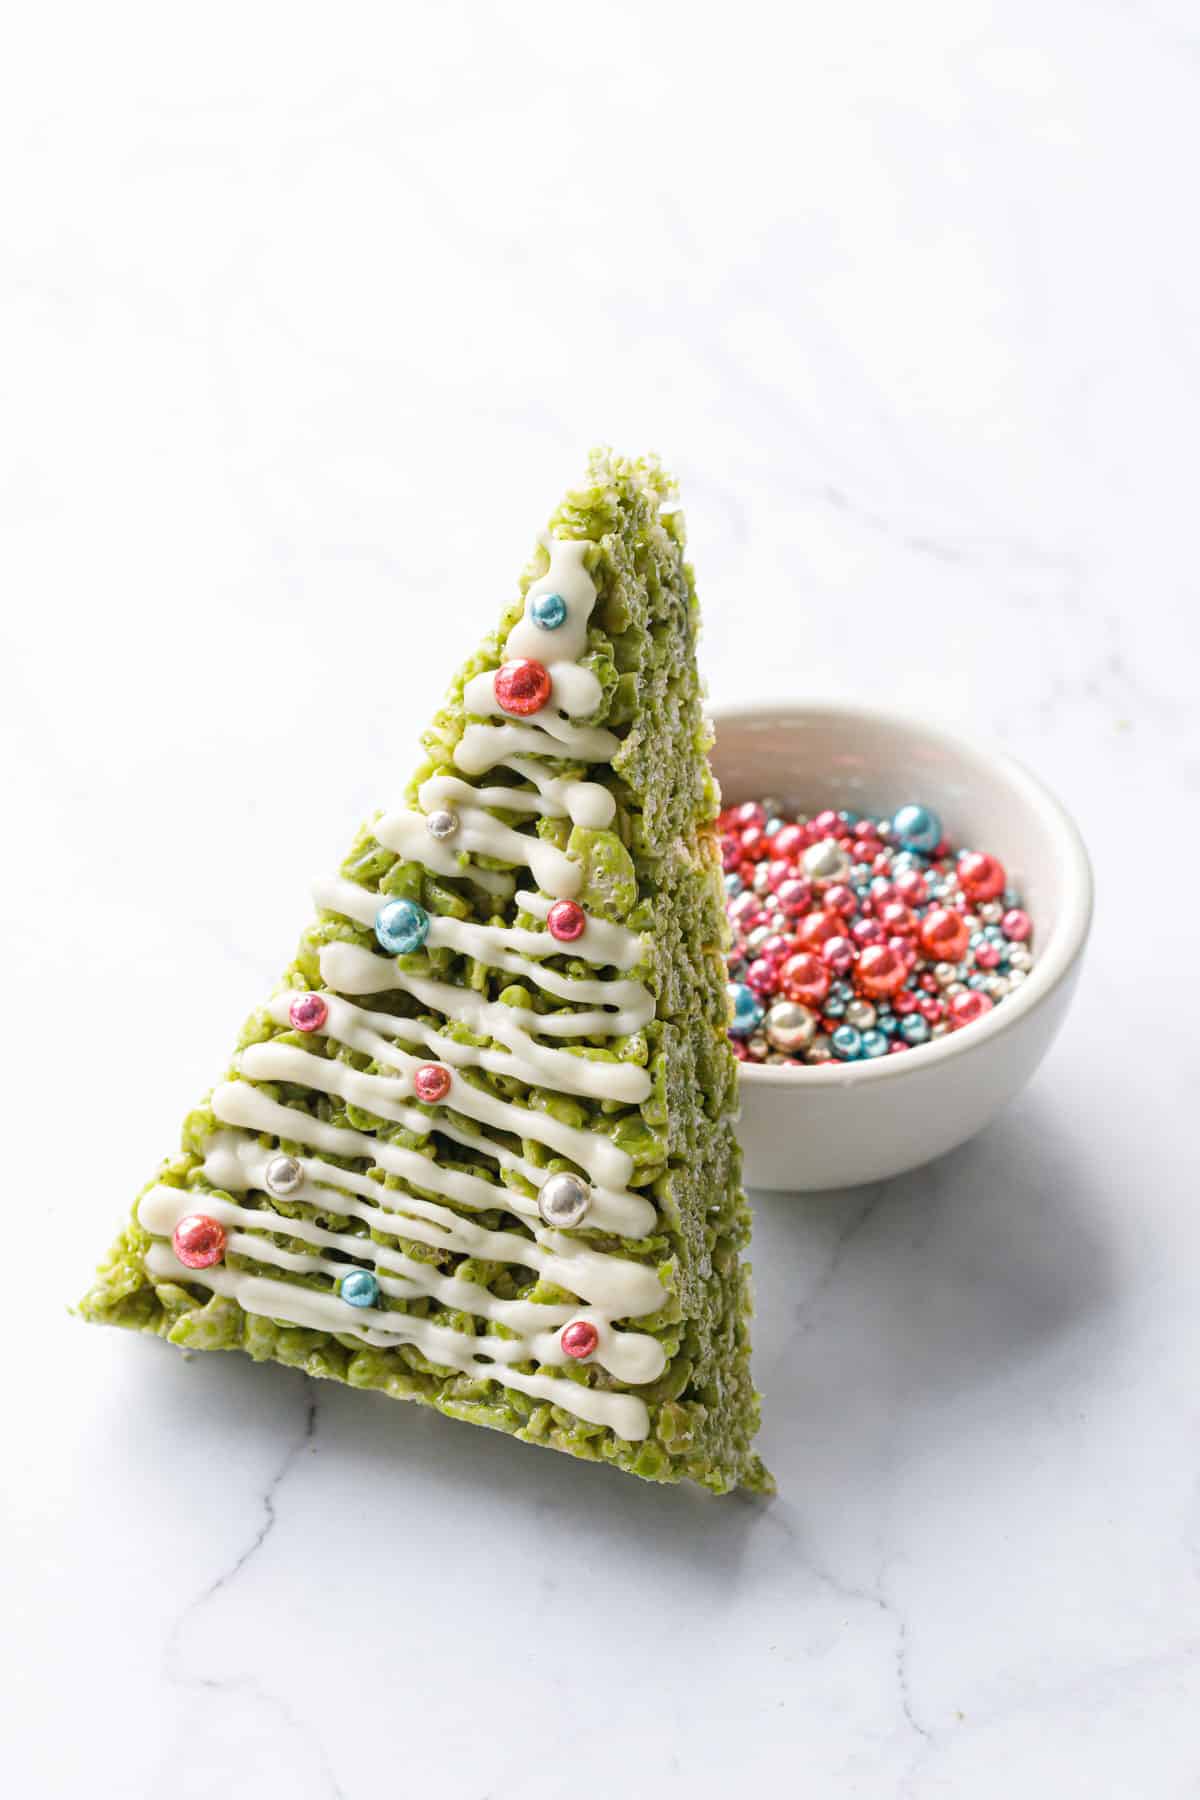 Matcha Rice Crispy Treats cut into a triangle and decorated like a Christmas tree, leaning up against a bowl of metallic sprinkles.